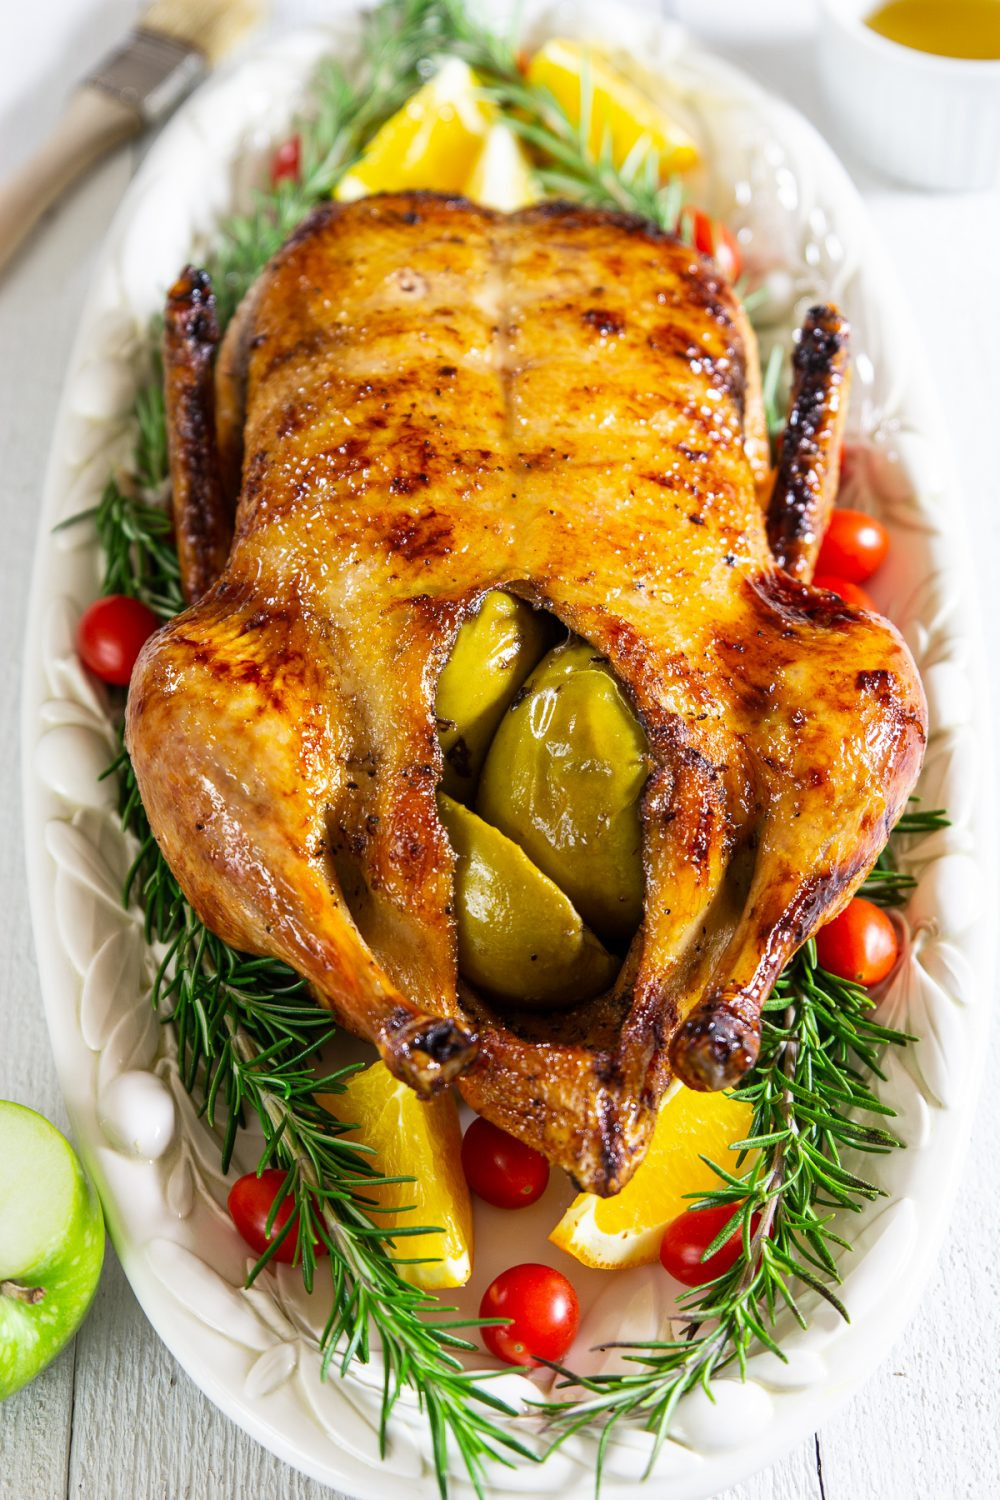 Top 23 Christmas Duck Recipes - Best Recipes Ideas and Collections